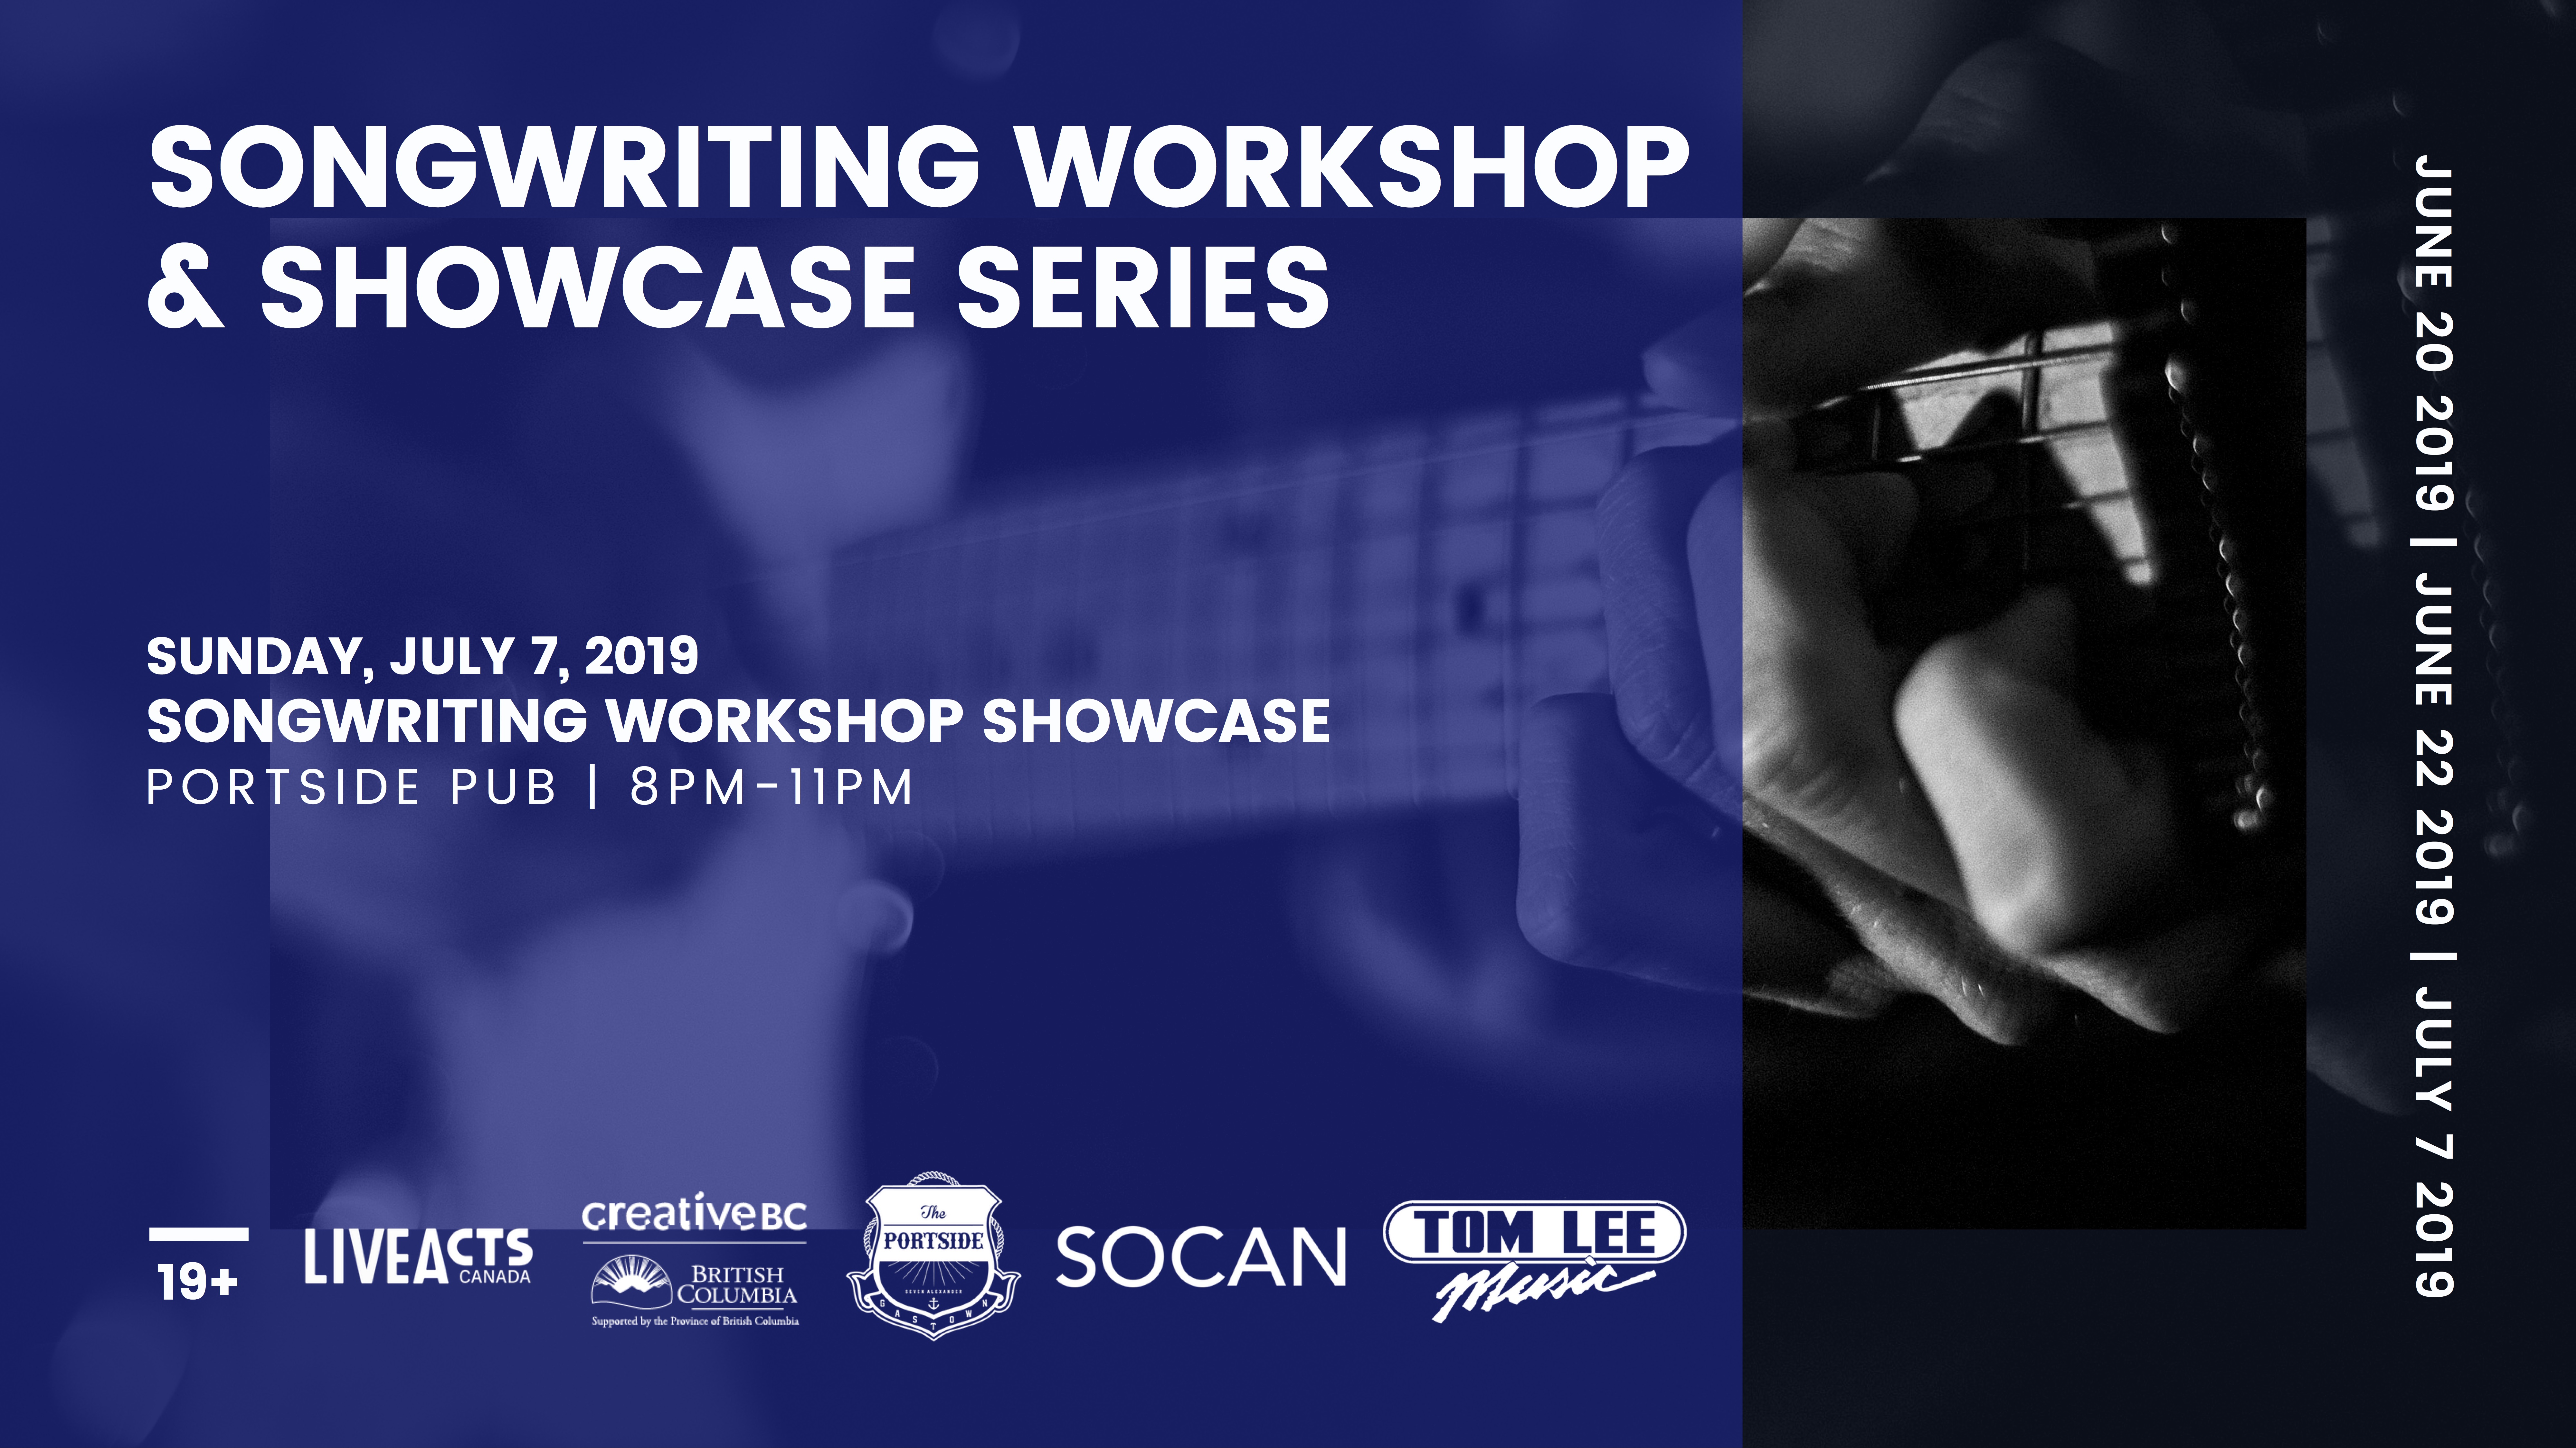 Songwriting Workshop and Showcase Series